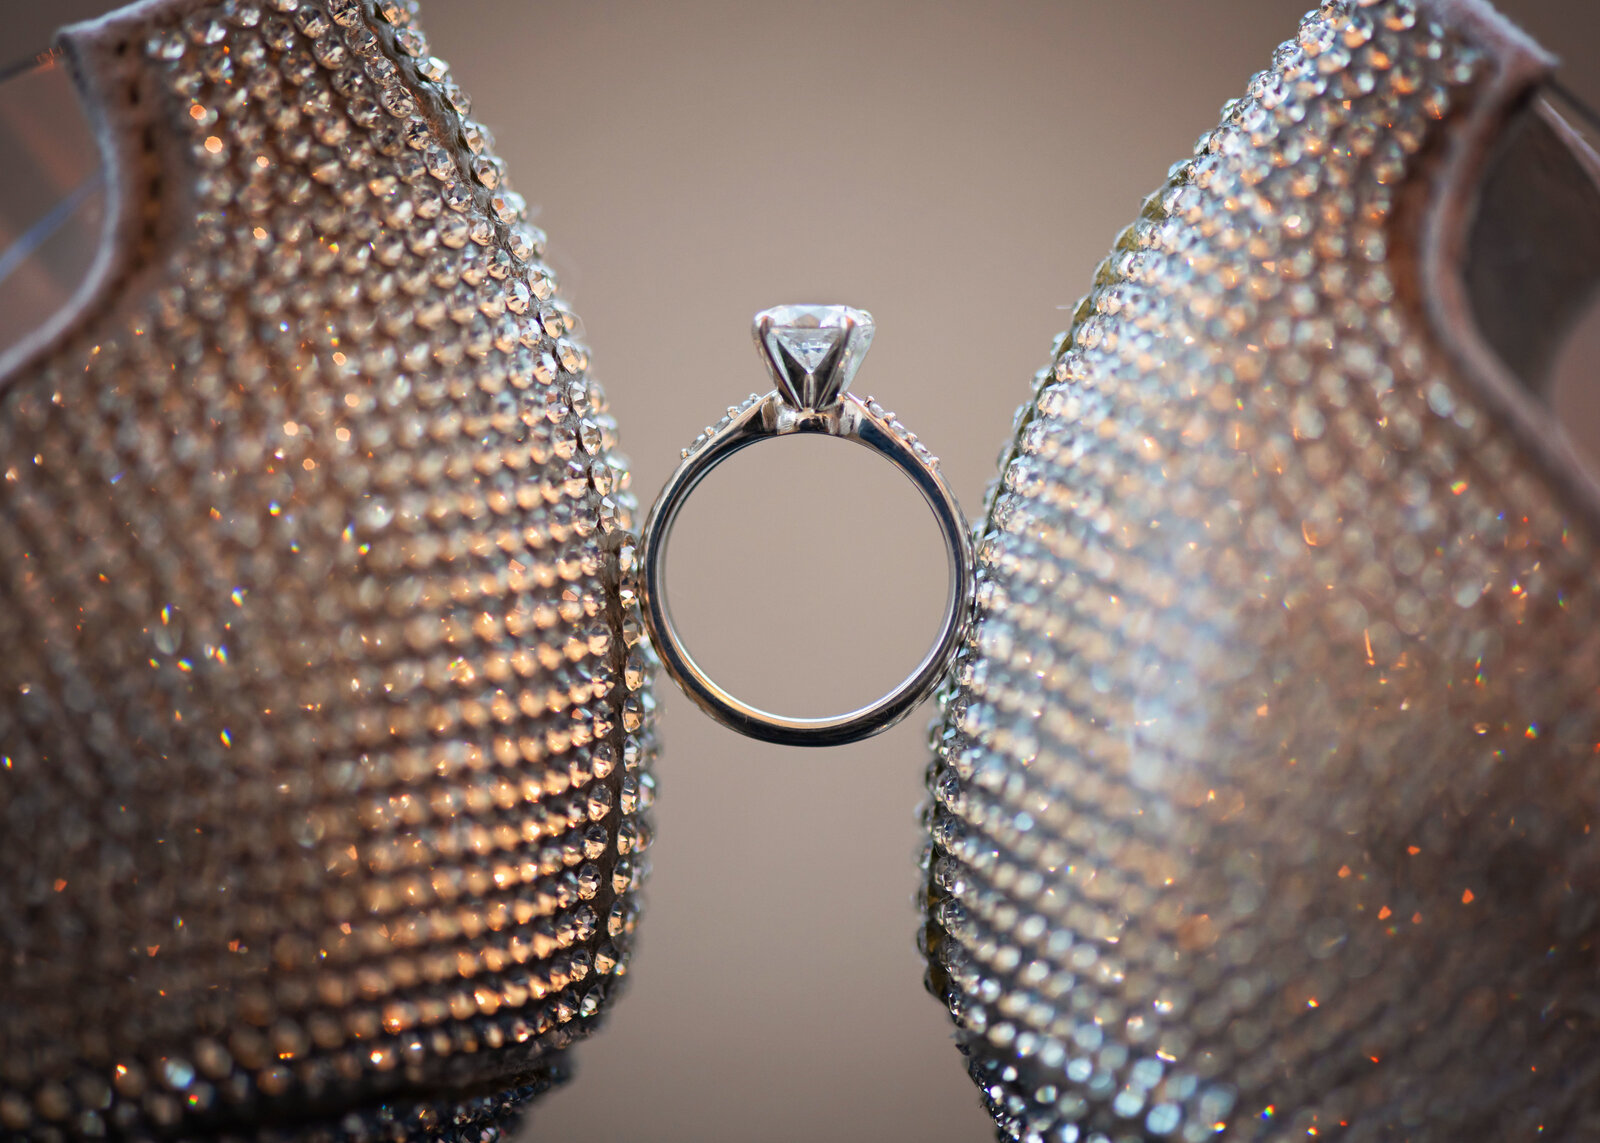 High end shot of sparkling Louboutin shoes holding up an engagement ring.